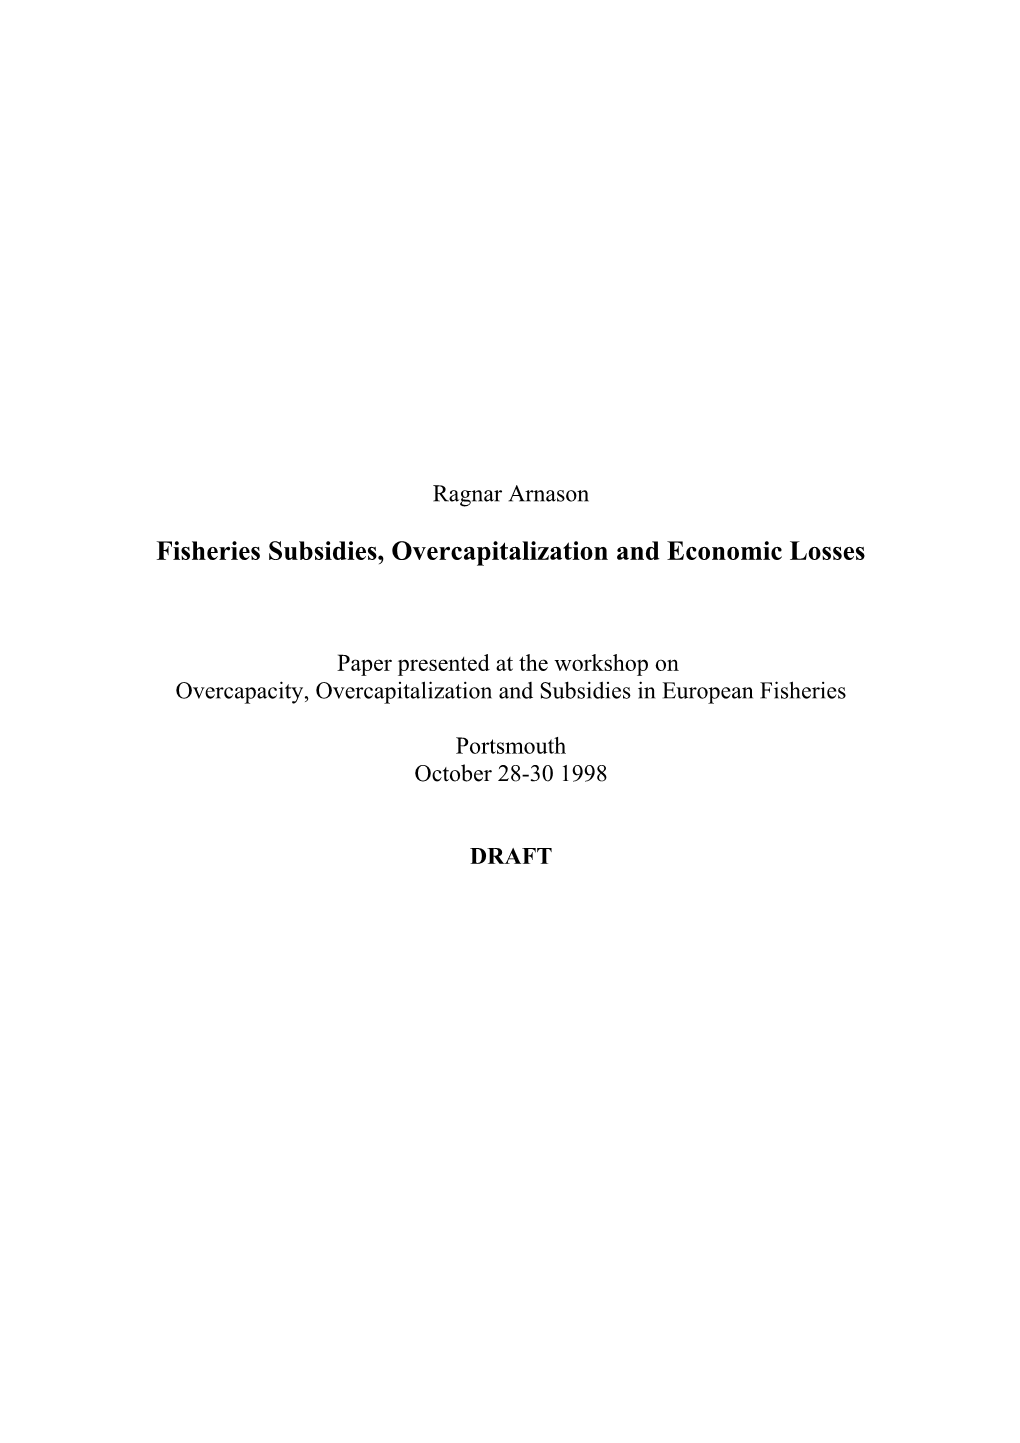 Fisheries Subsidies, Overcapitalization and Economic Losses